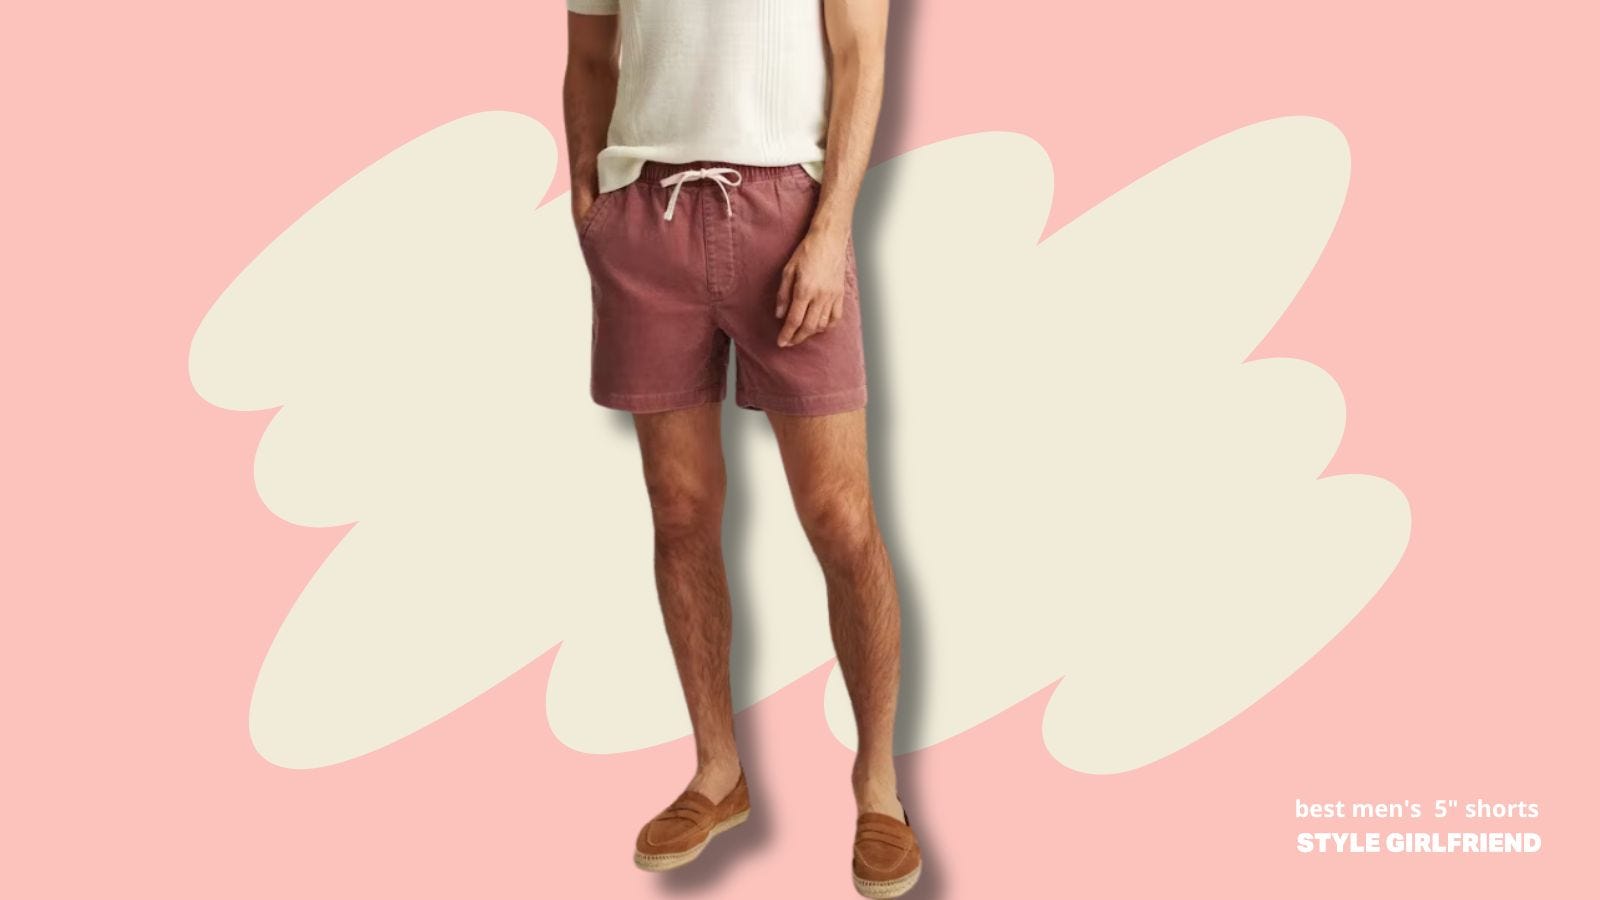 lower half of a man wearing a cream-colored short-sleeve shirt, drawstring red shorts, and suede espadrilles